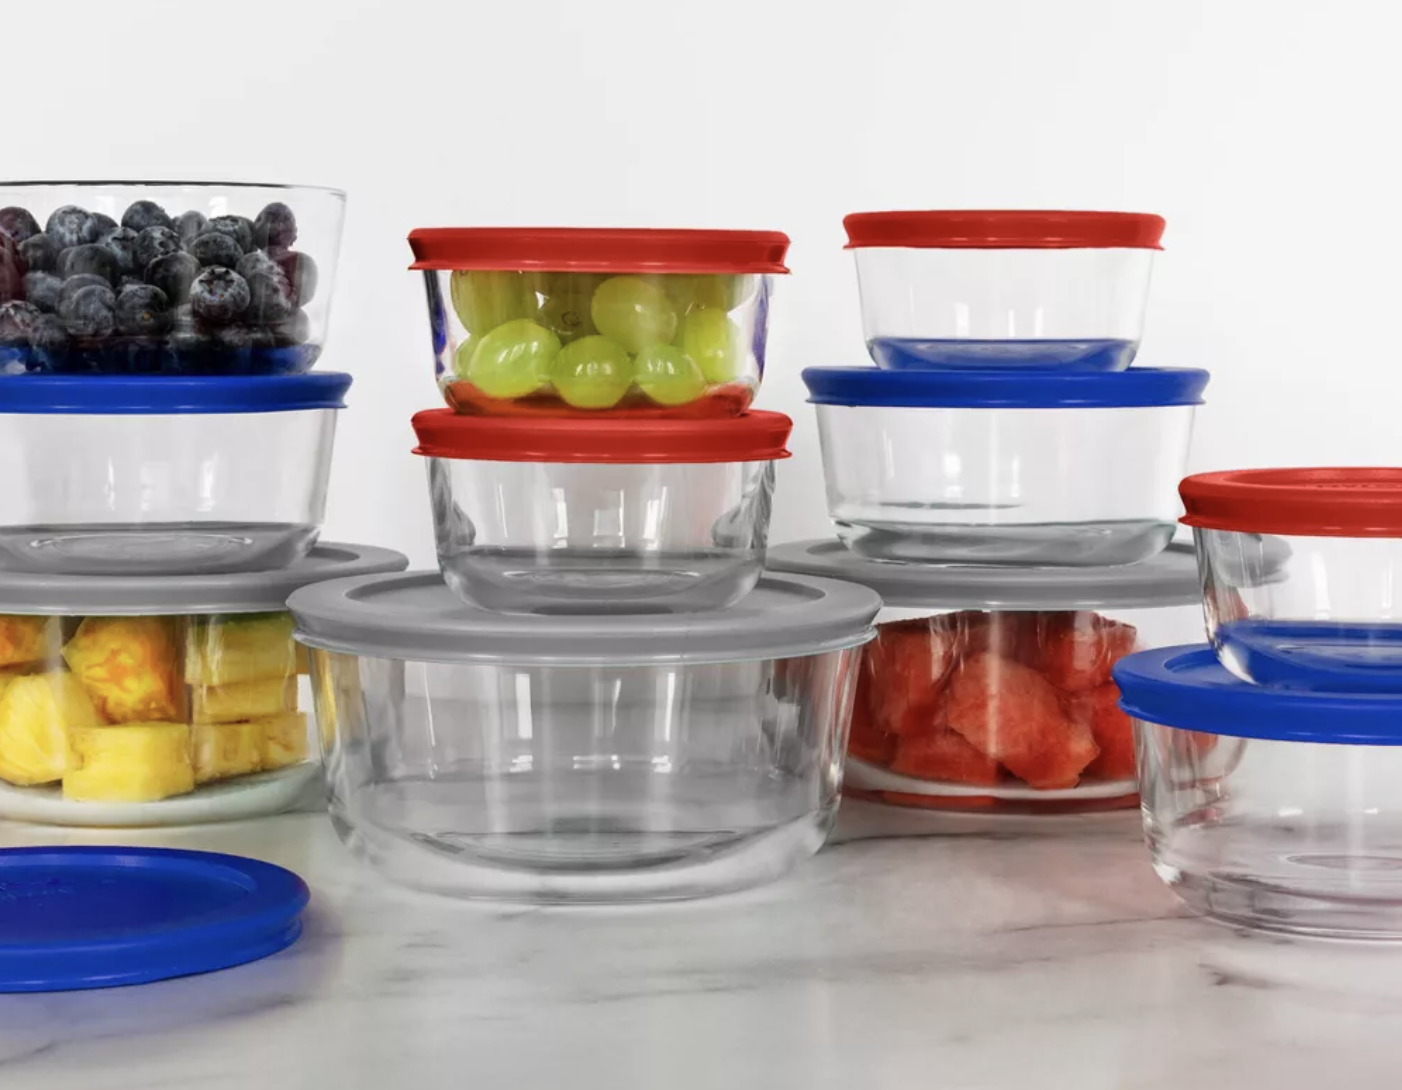 Pyrex 22pc Glass Food Storage Container Set for sale online